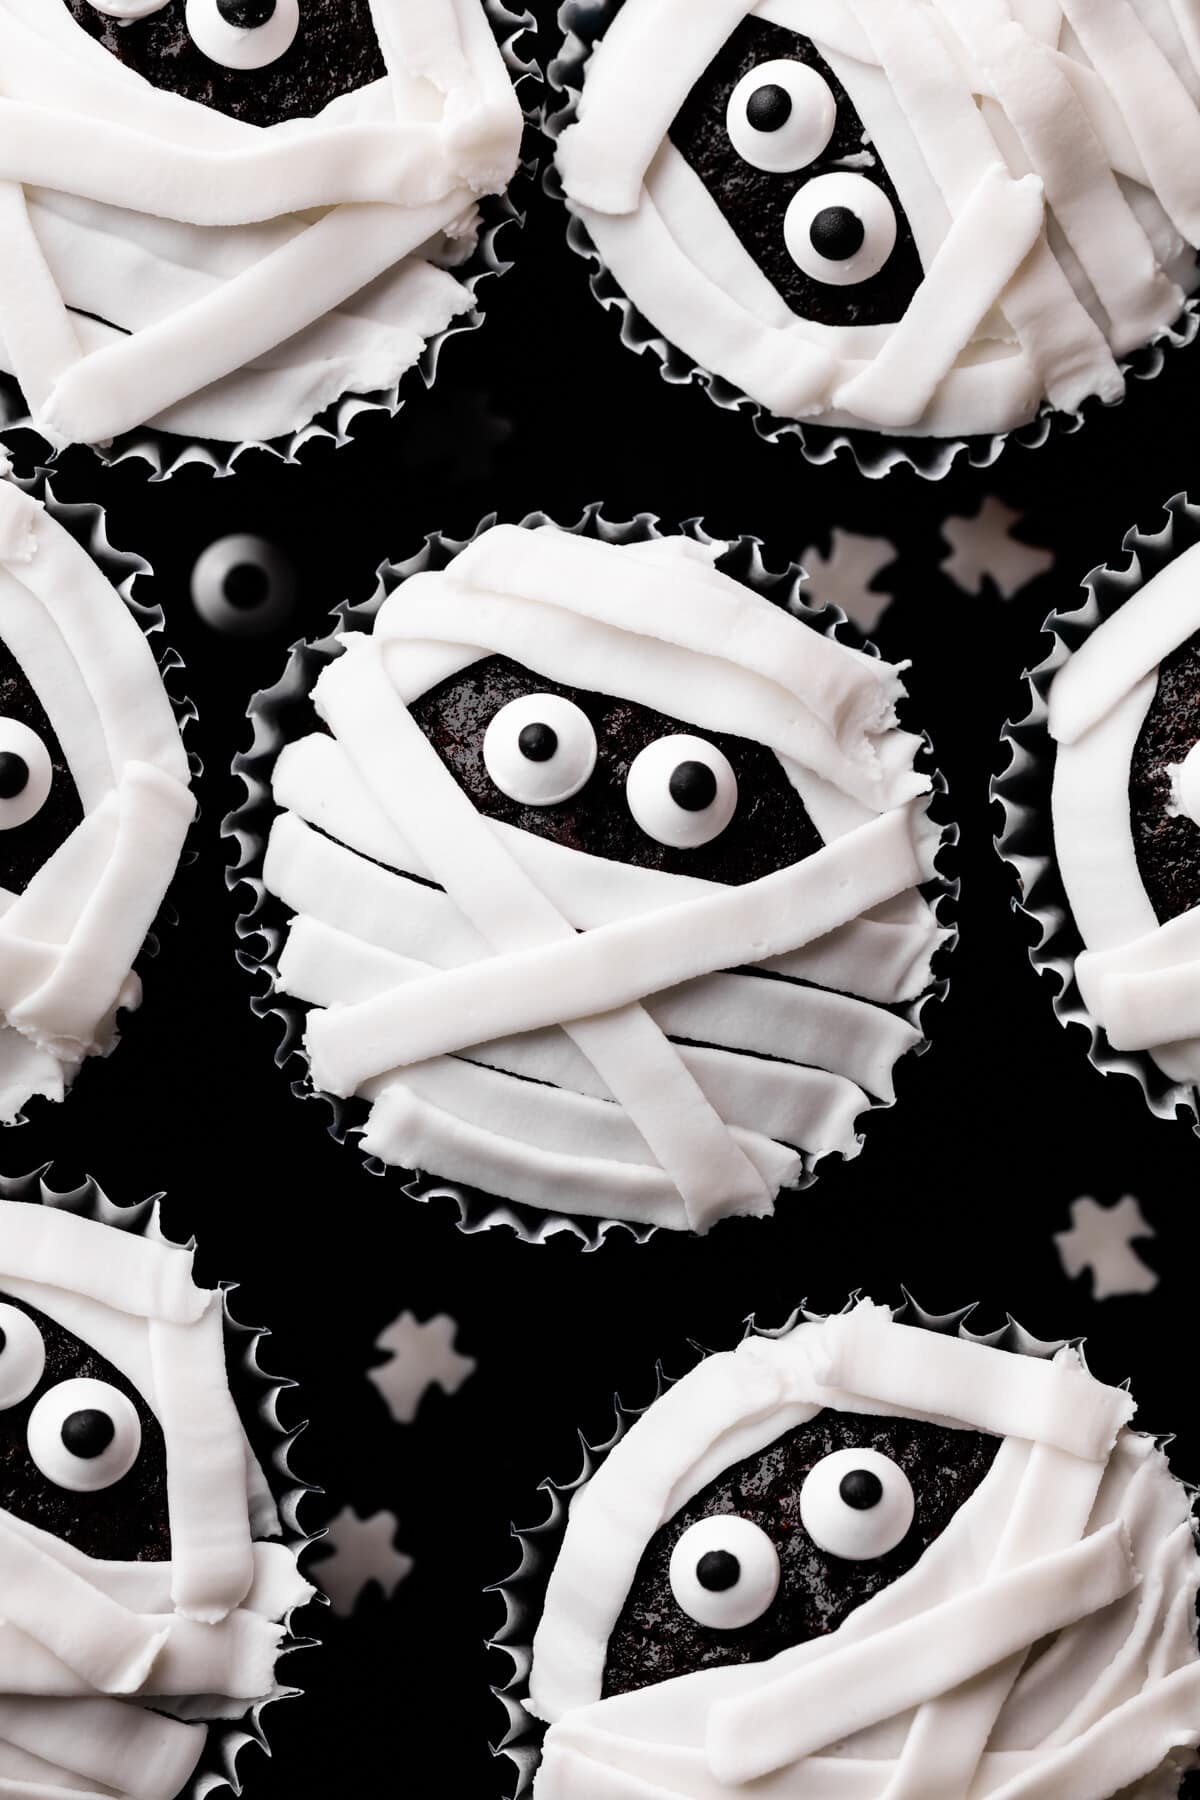 chocolate cupcake with white icing and candy eyes decoration.